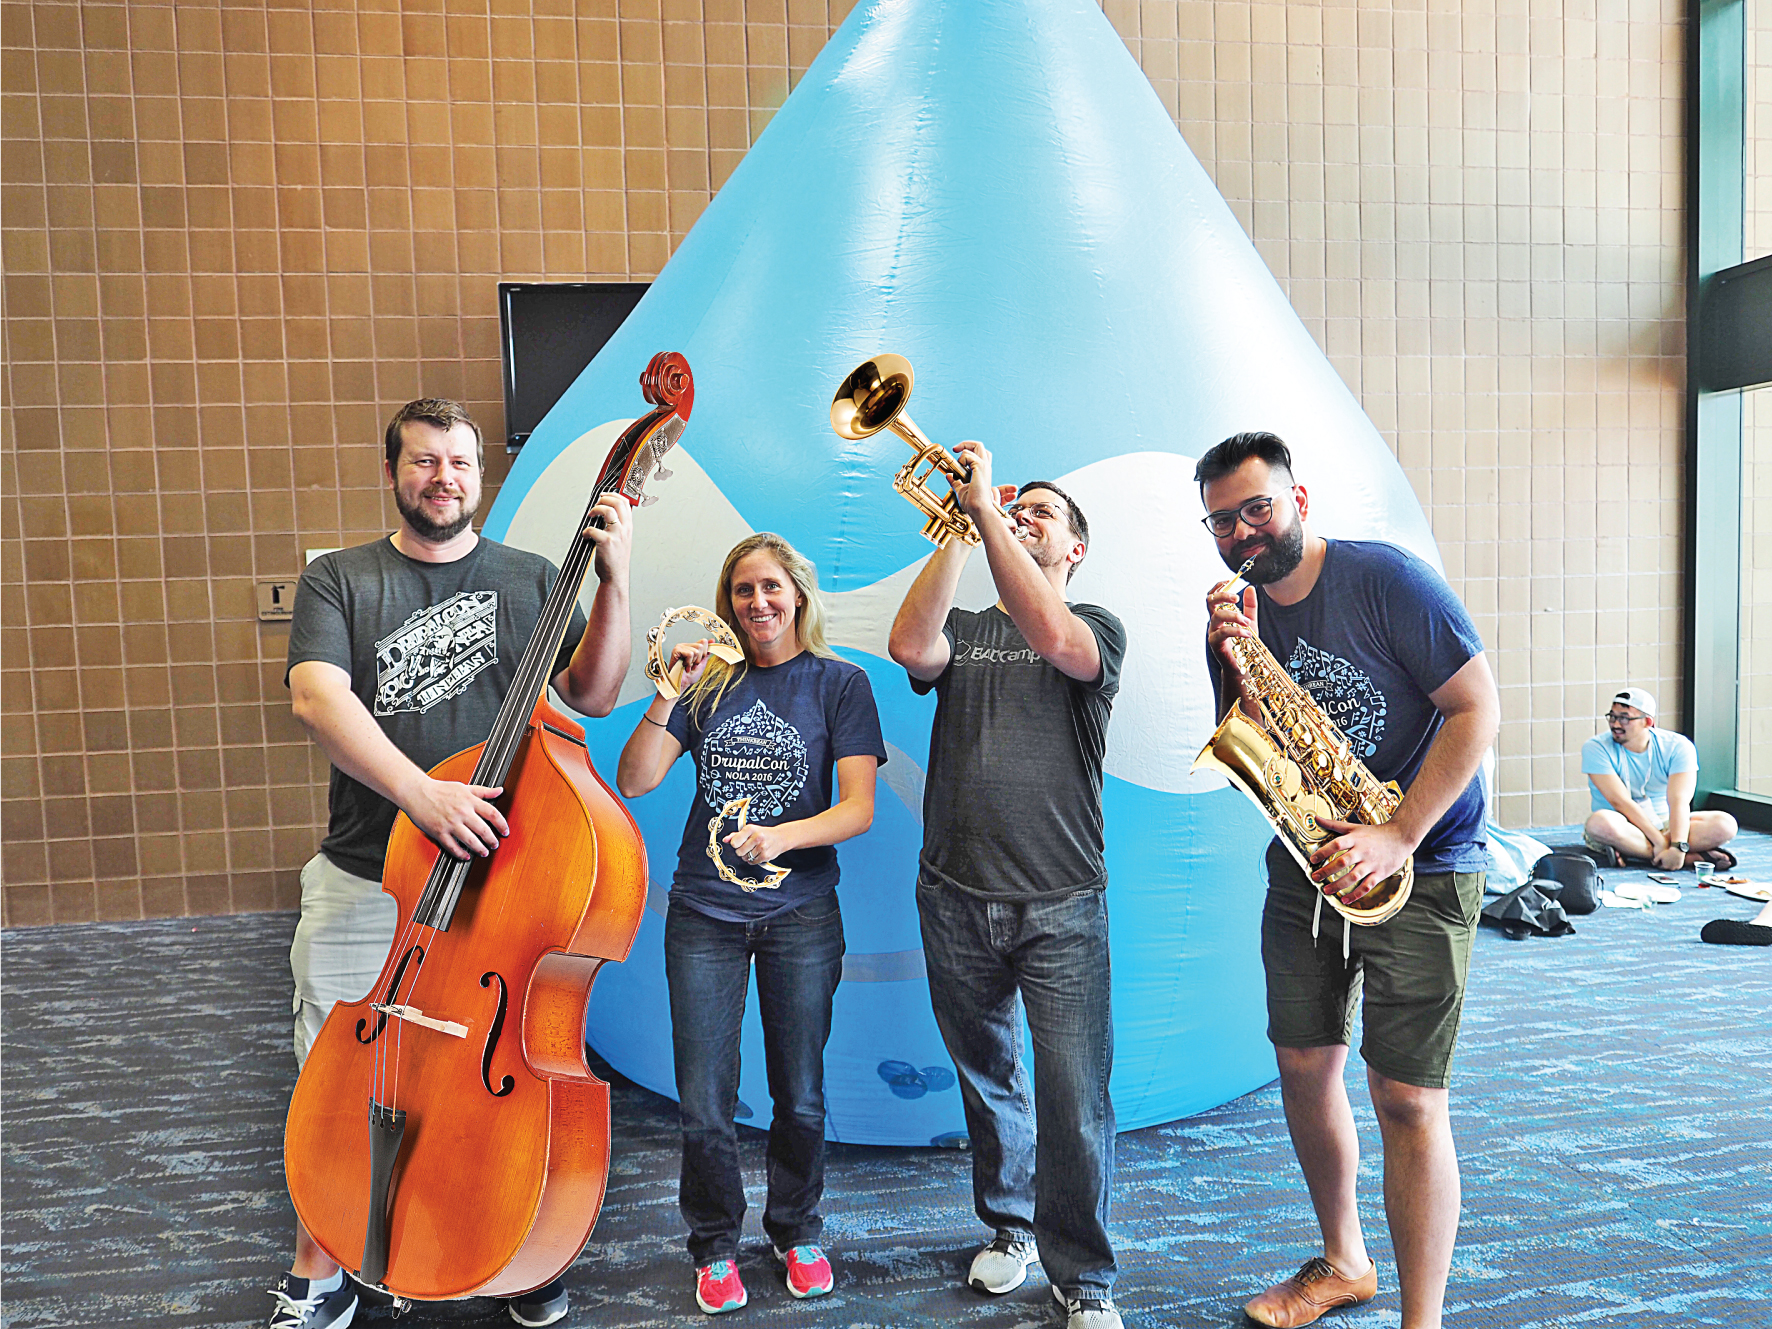 Thinkbean team being silly and pretending to play jazz